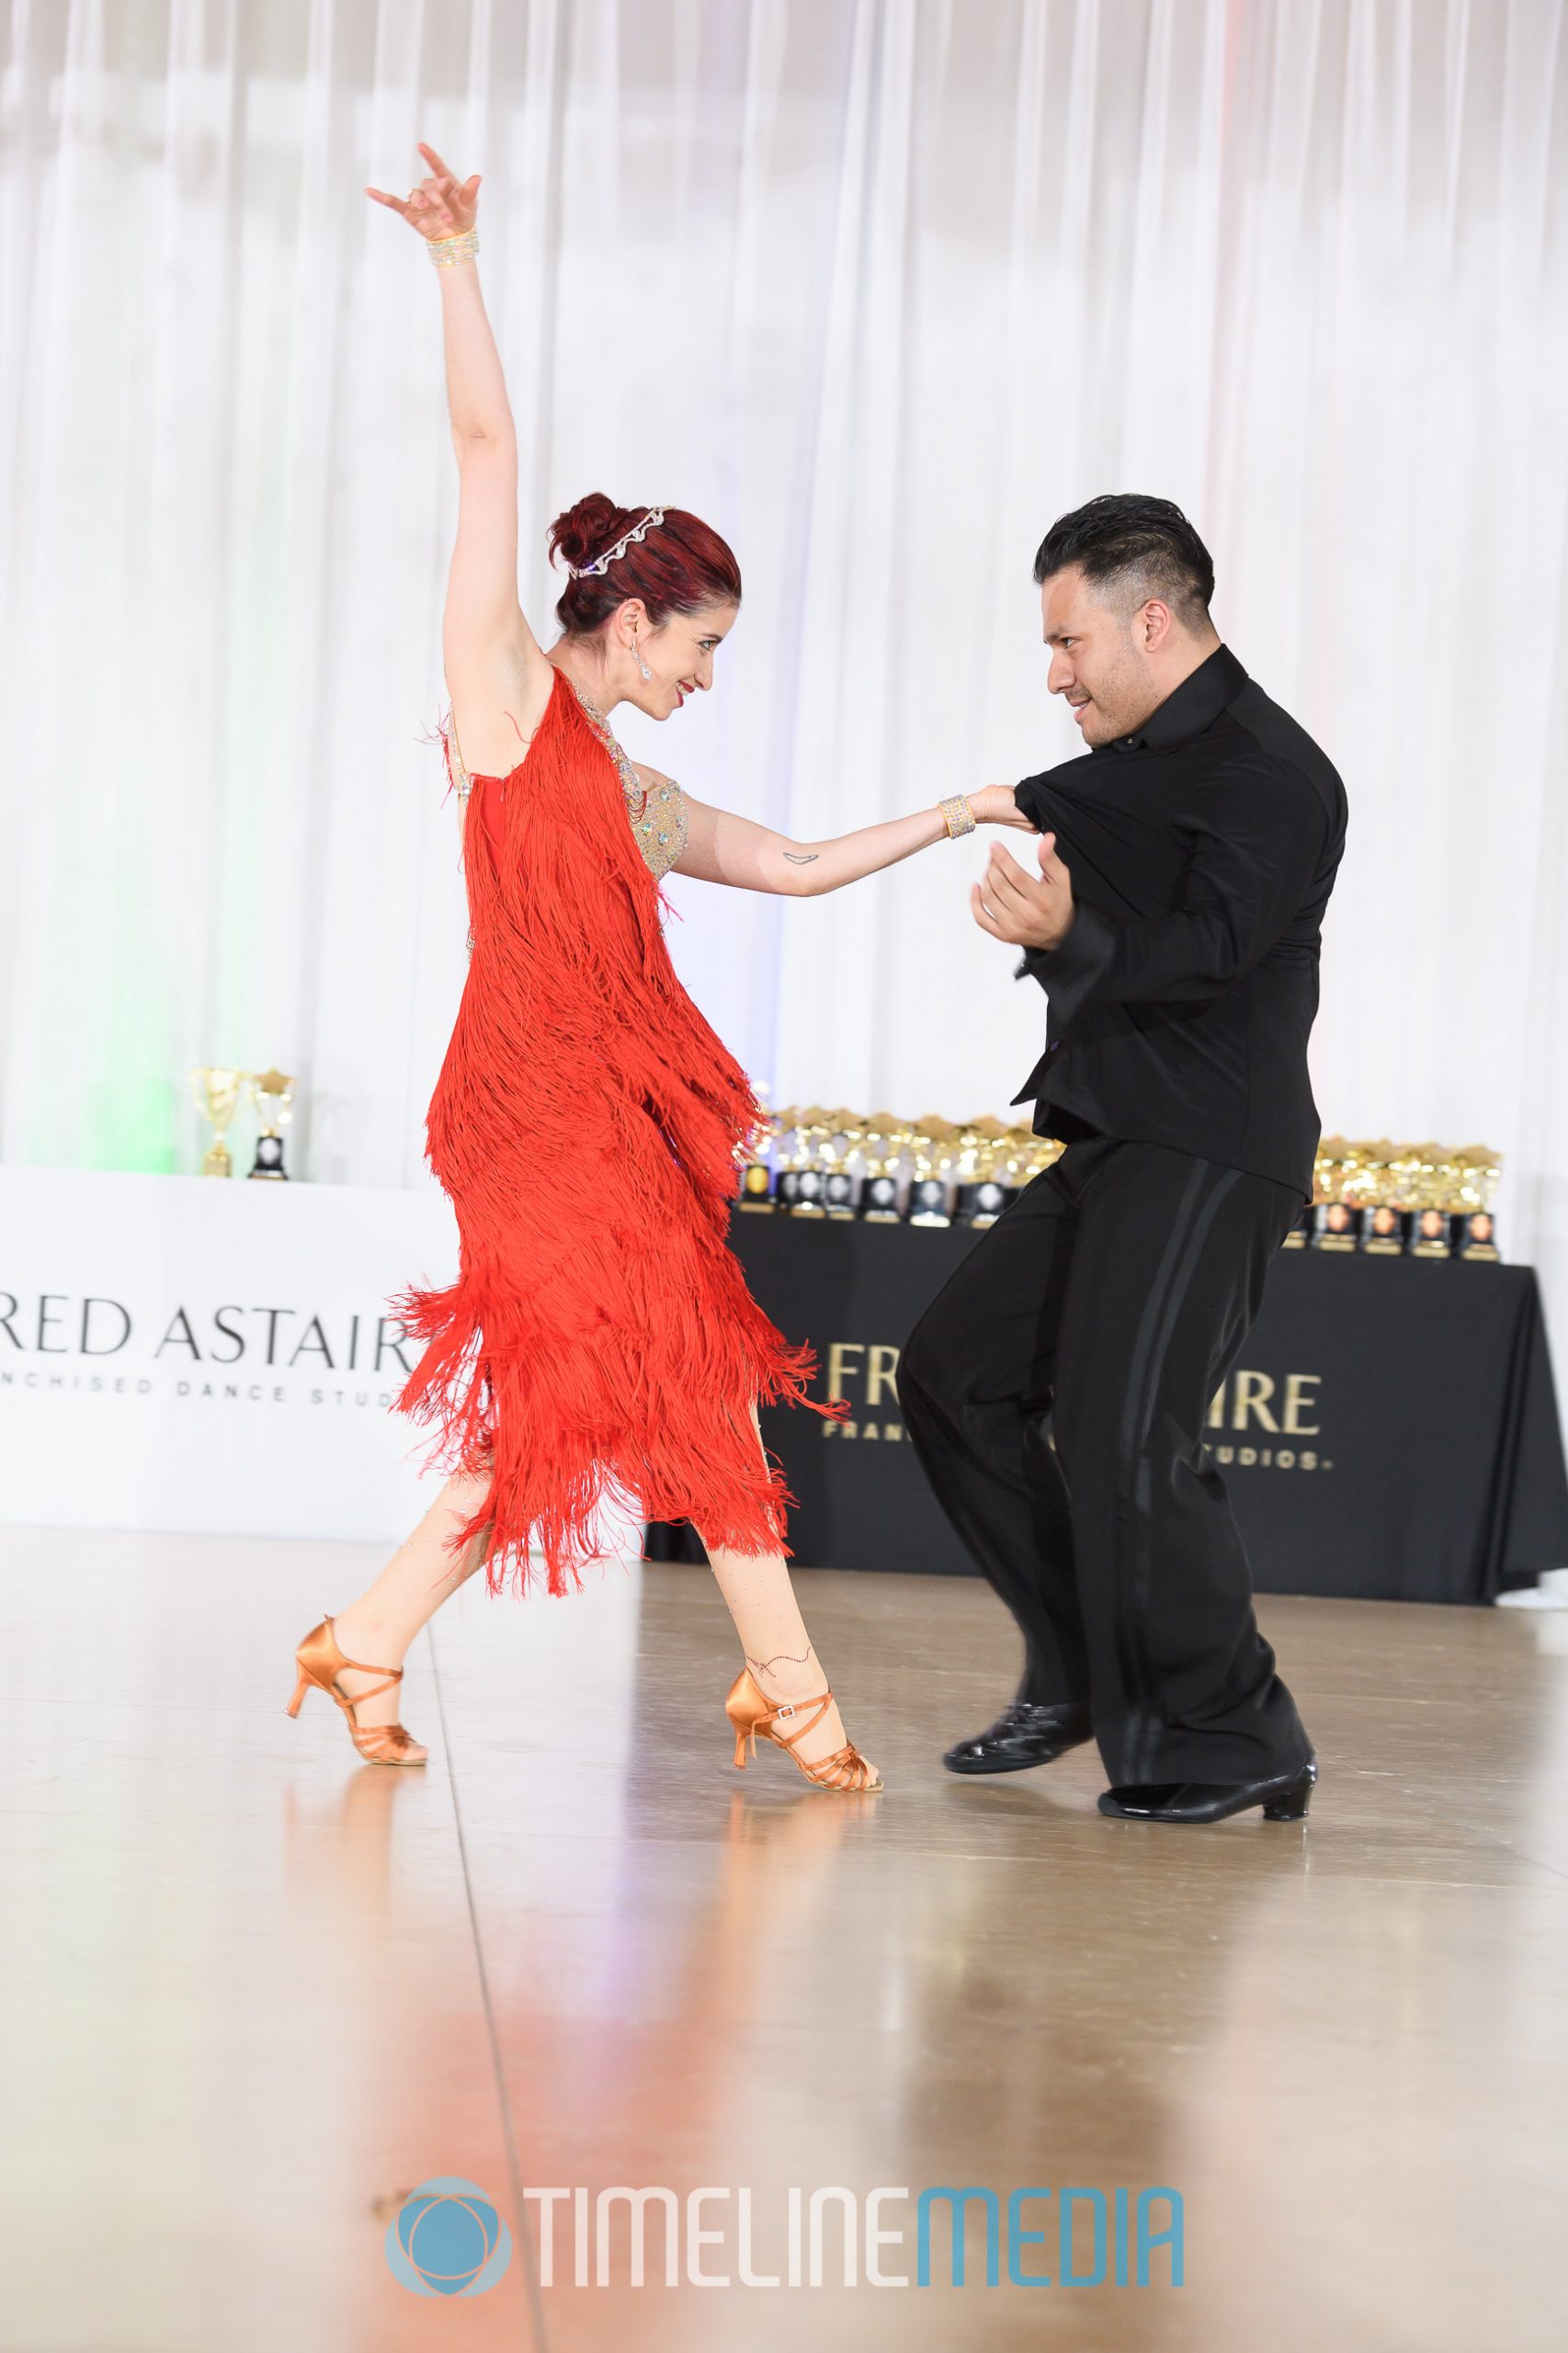 Fred Astaire Reston Professional Show ©TimeLine Media